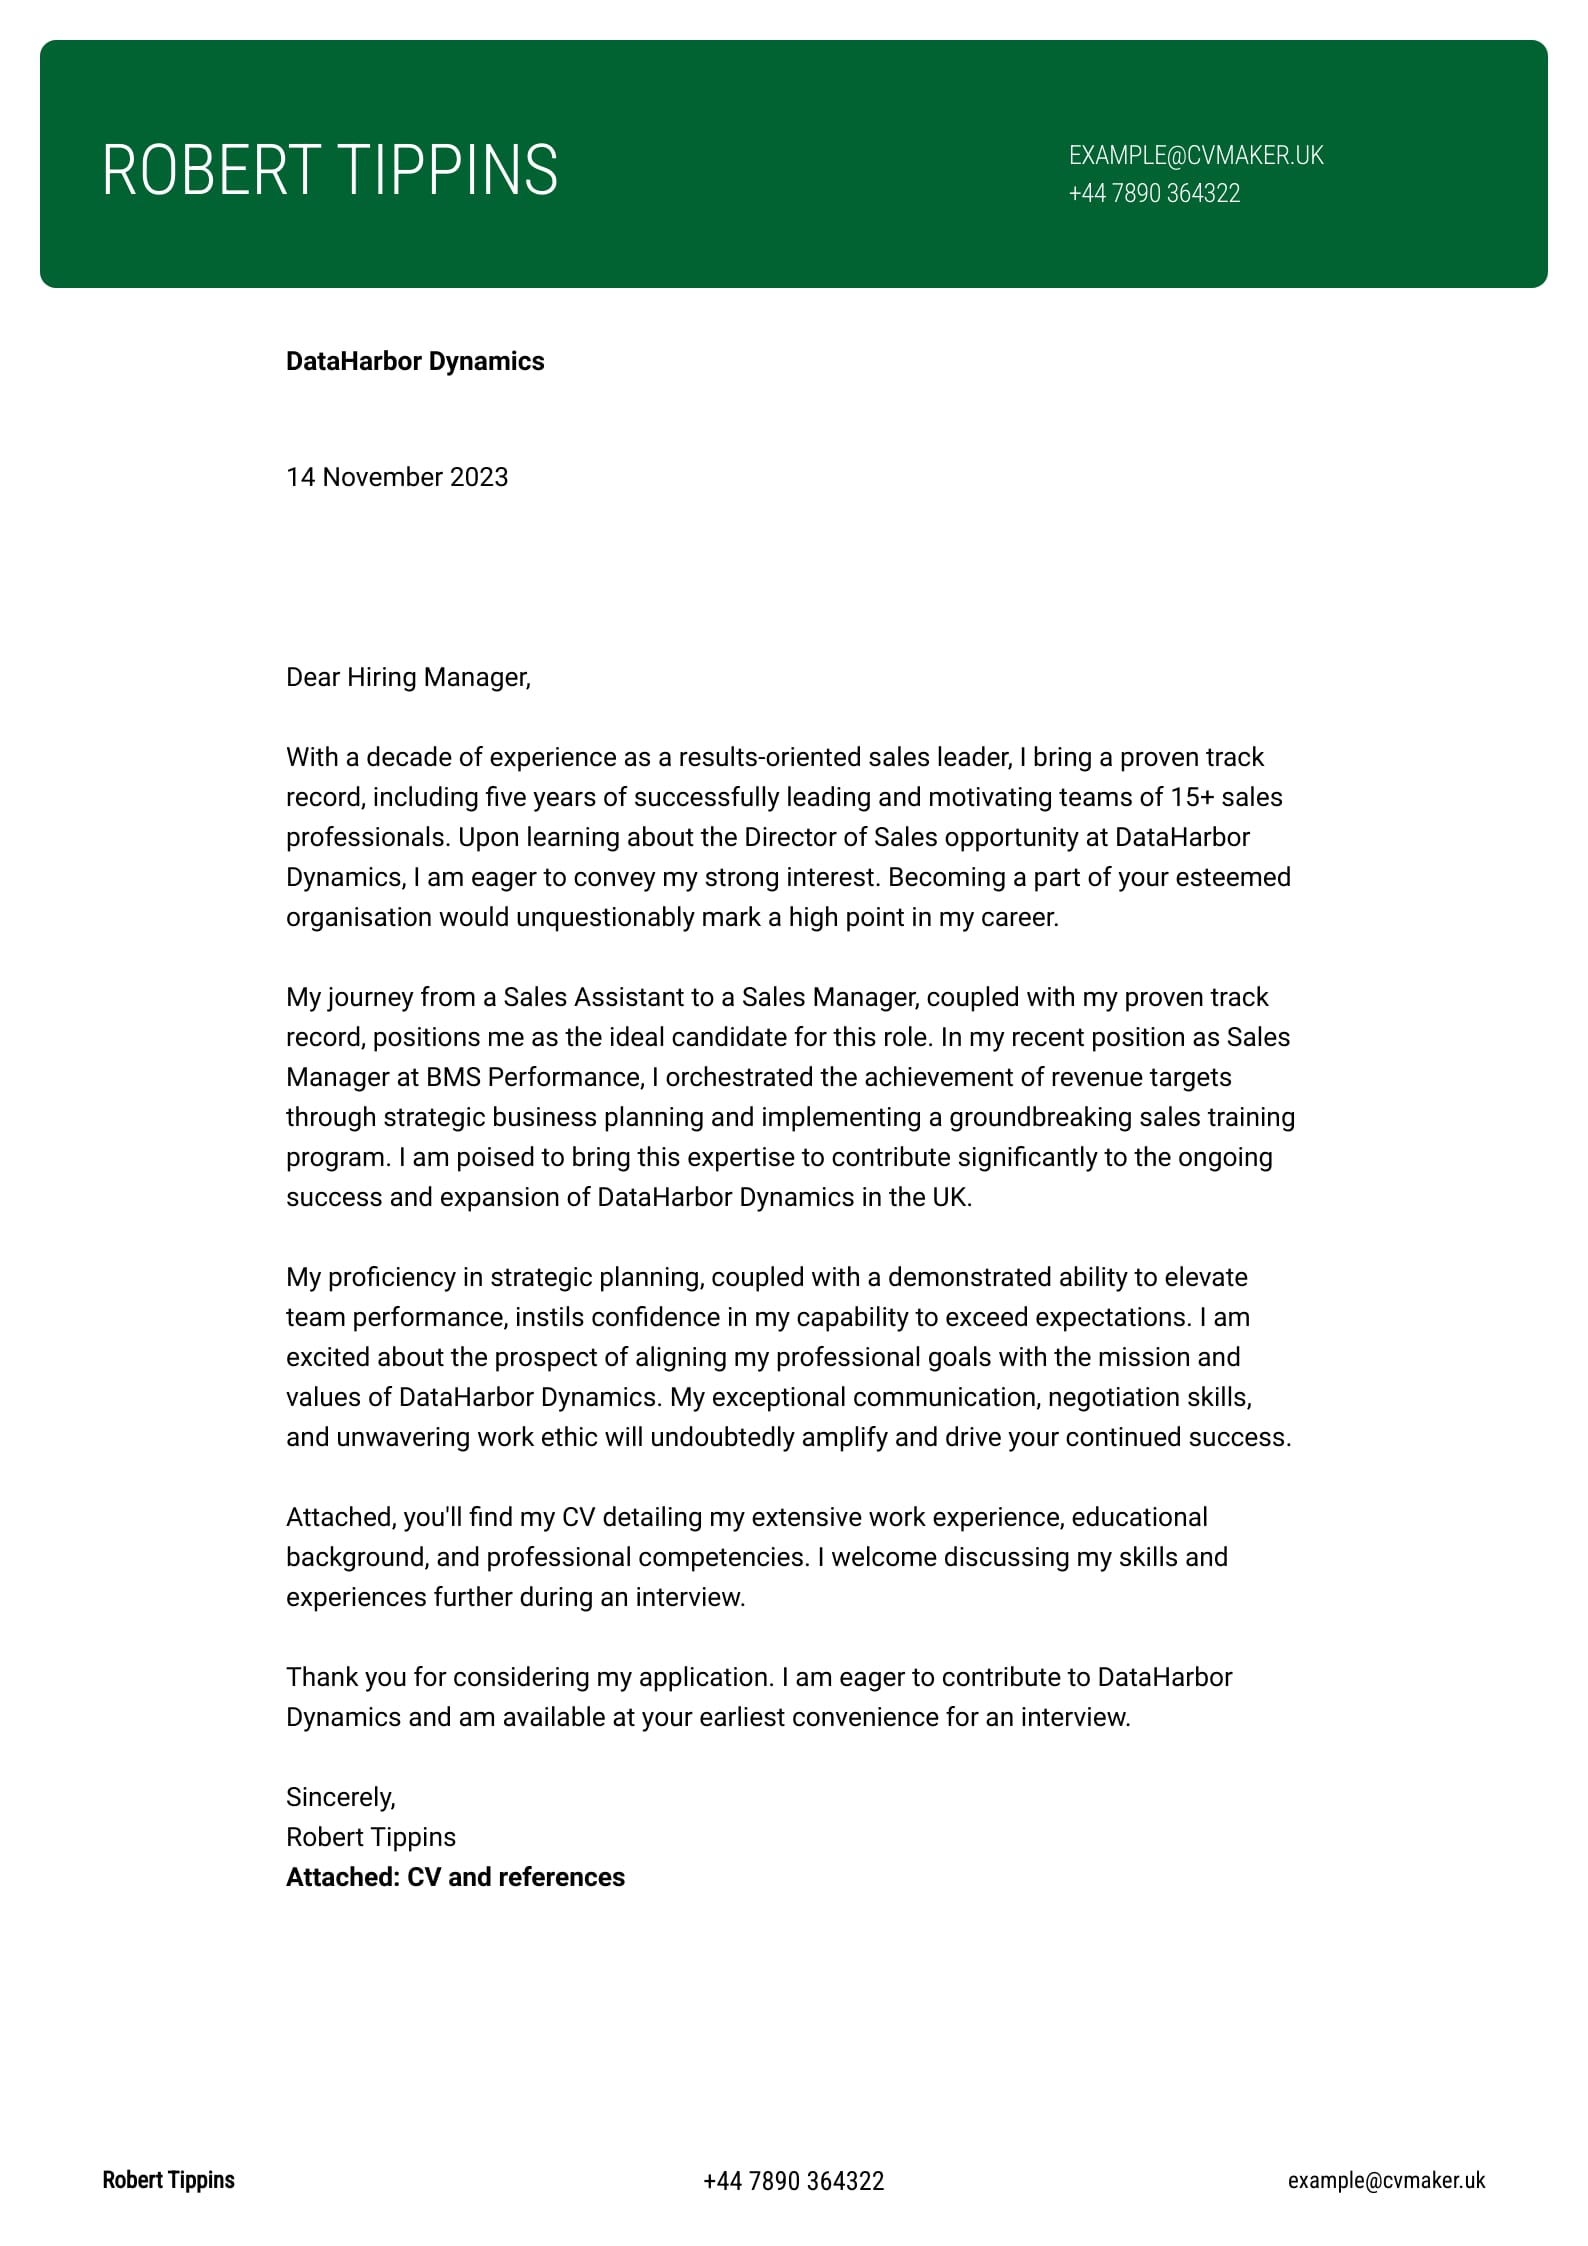 Cover letter example - Sales - Cornell template